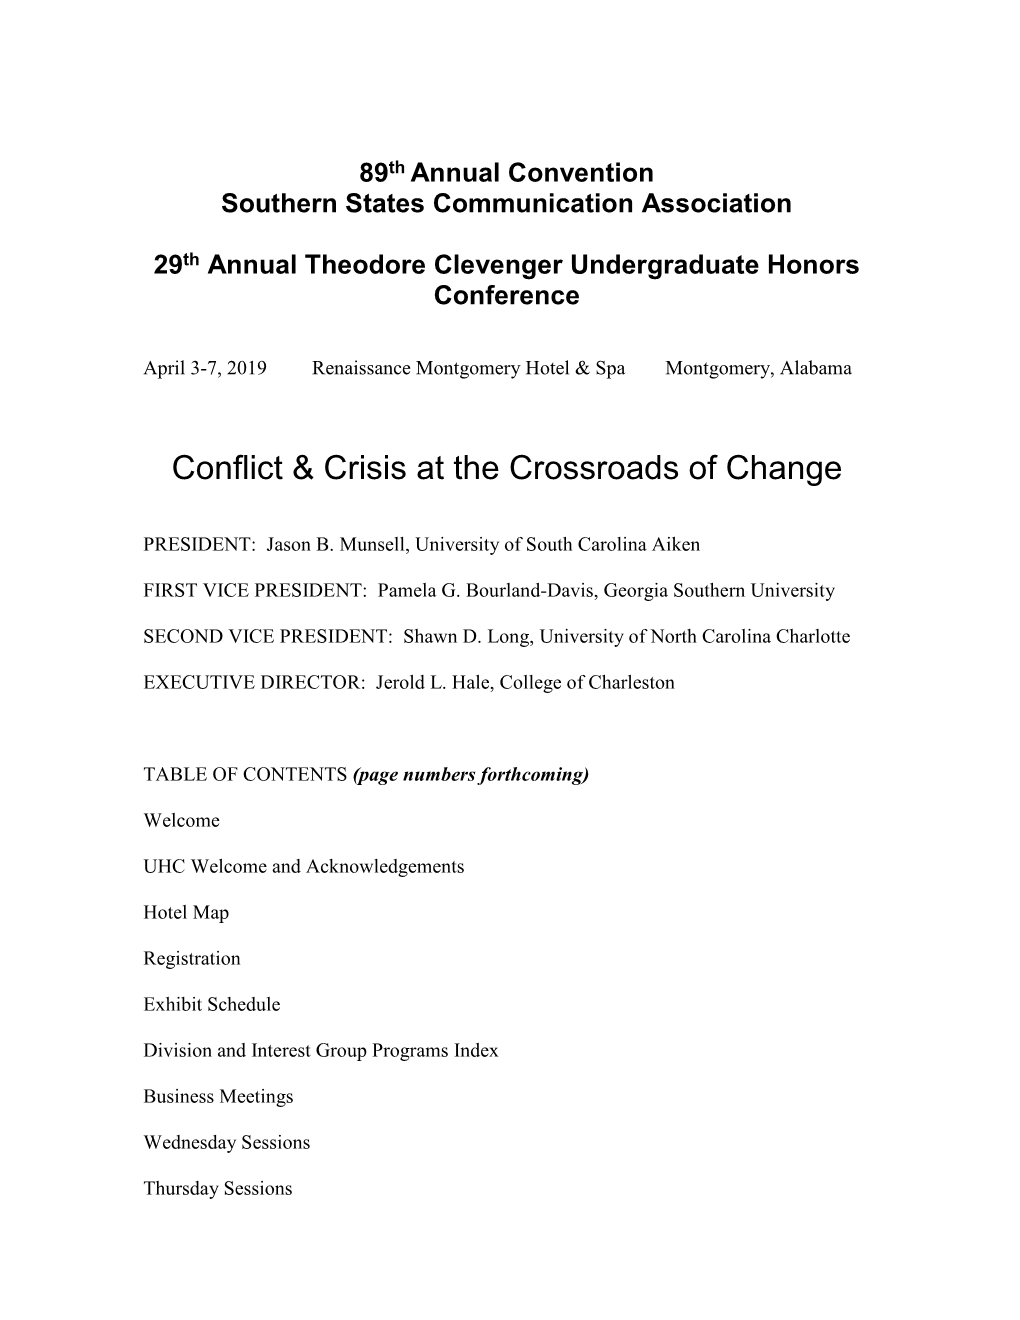 Conflict & Crisis at the Crossroads of Change